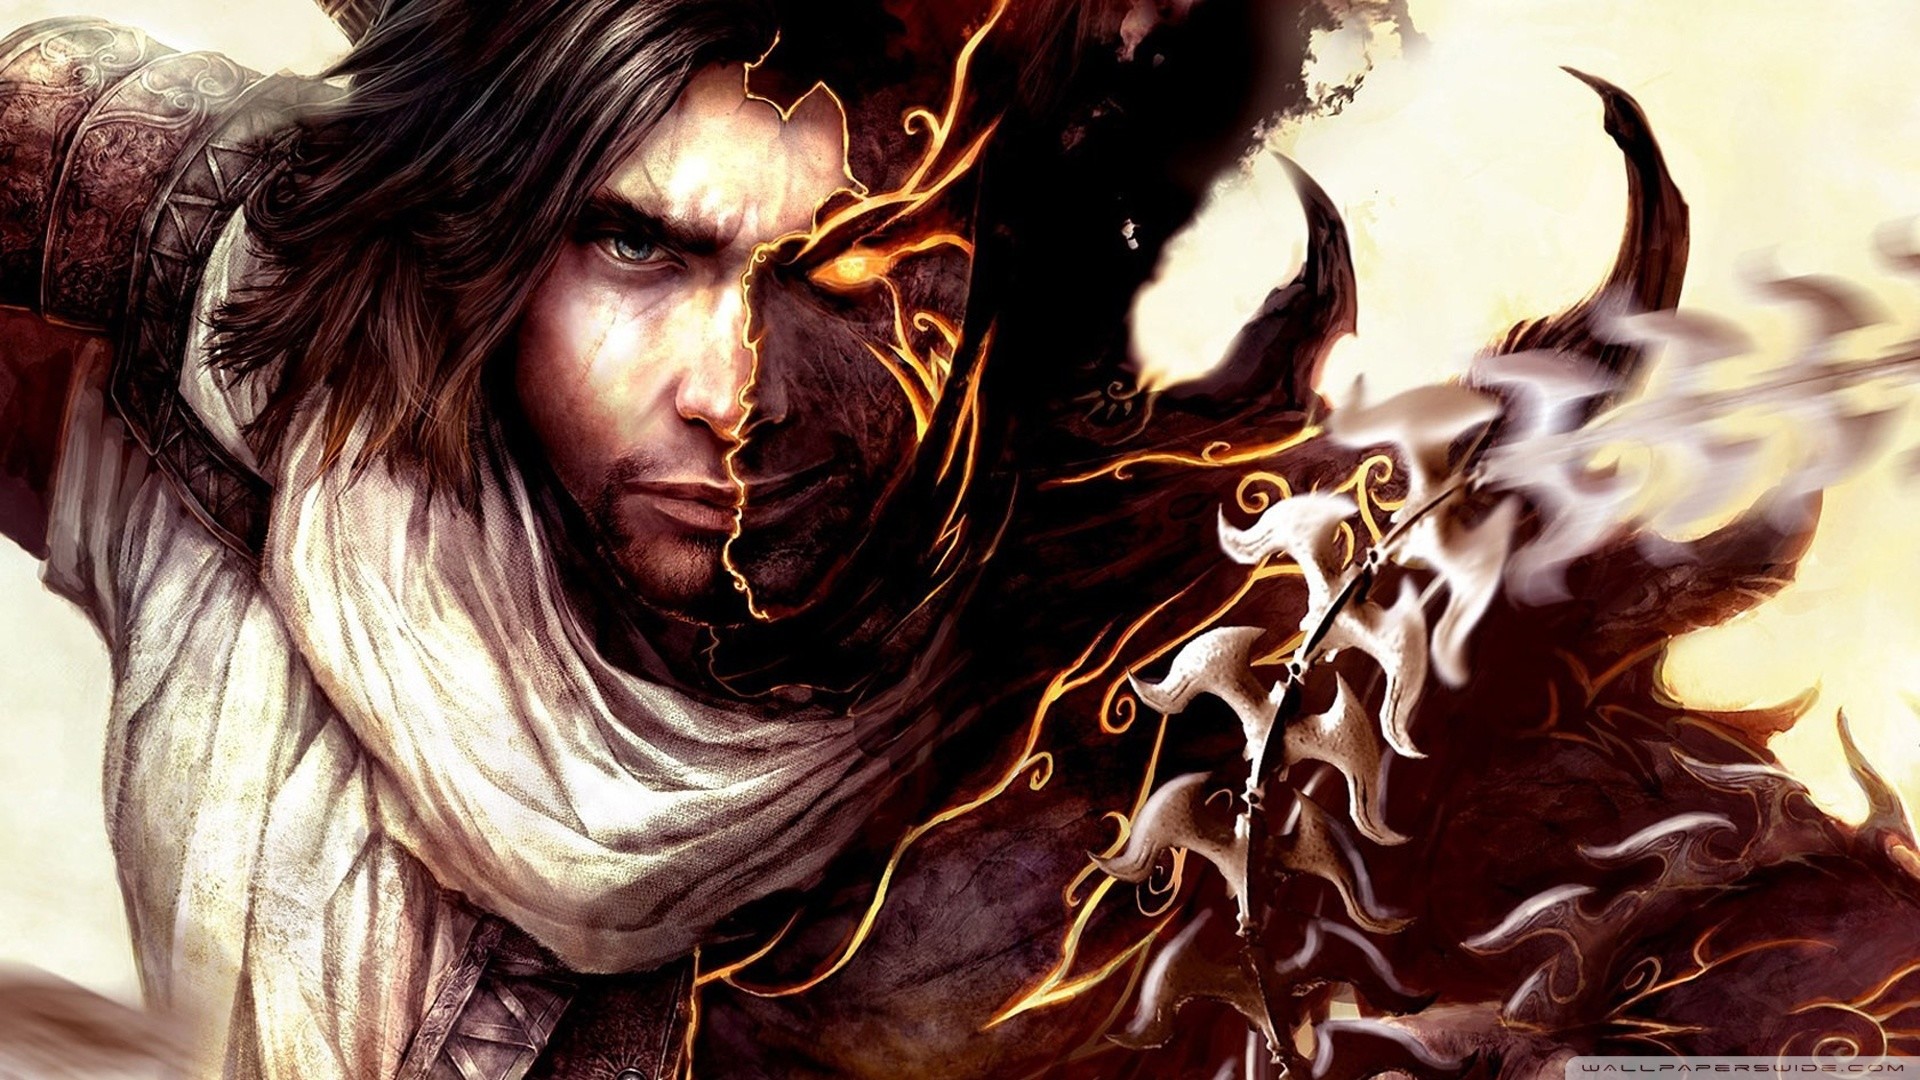 1920x1080 ... Full HD 1080p Prince of persia warrior within Wallpapers HD .